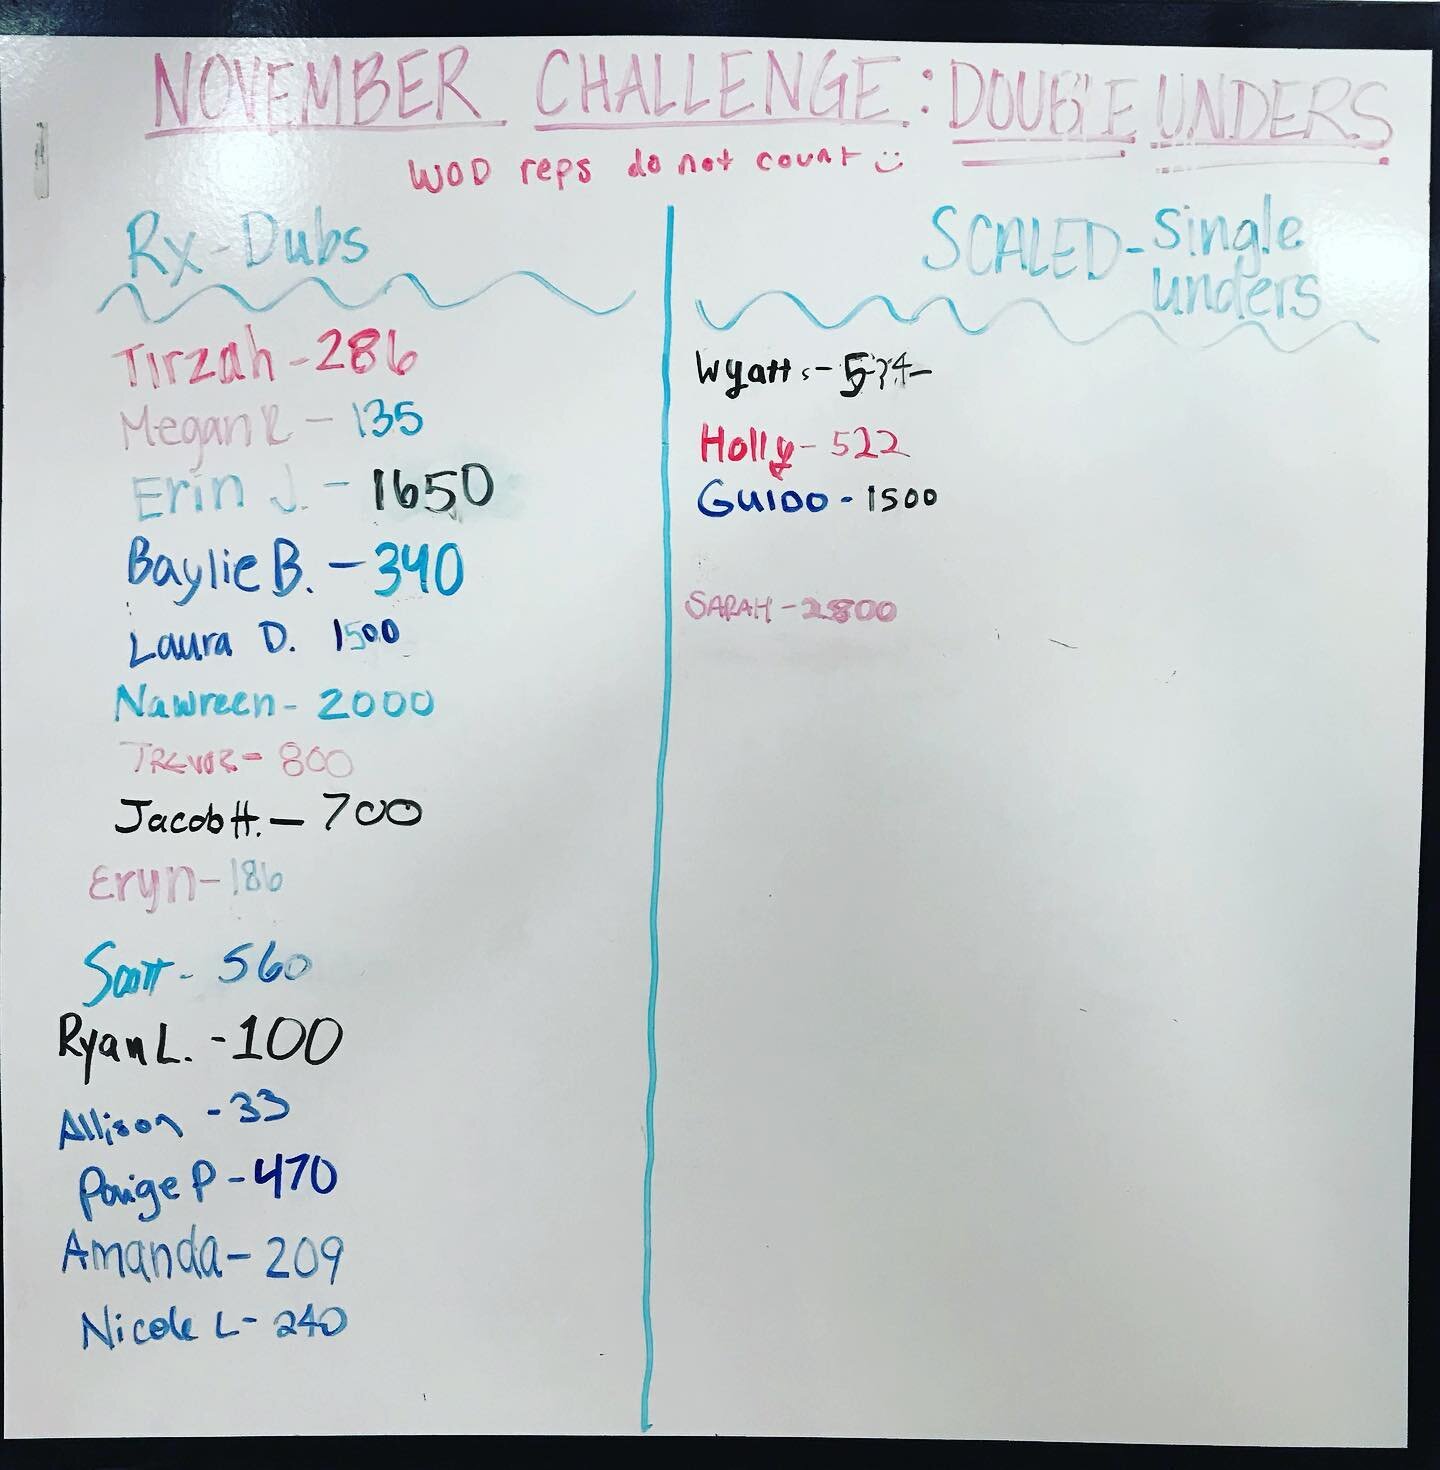 🌟Shout out to our November Jump Rope Challenge Winners!!🌟

Nawreen J. took the W in the Rx division with a grand total of 2,000 dubs 🤯
Way to go!! 👏👏

And Sarah B. claimed the Scaled division with a whopping 2,800 single unders🤩
Excellent work,